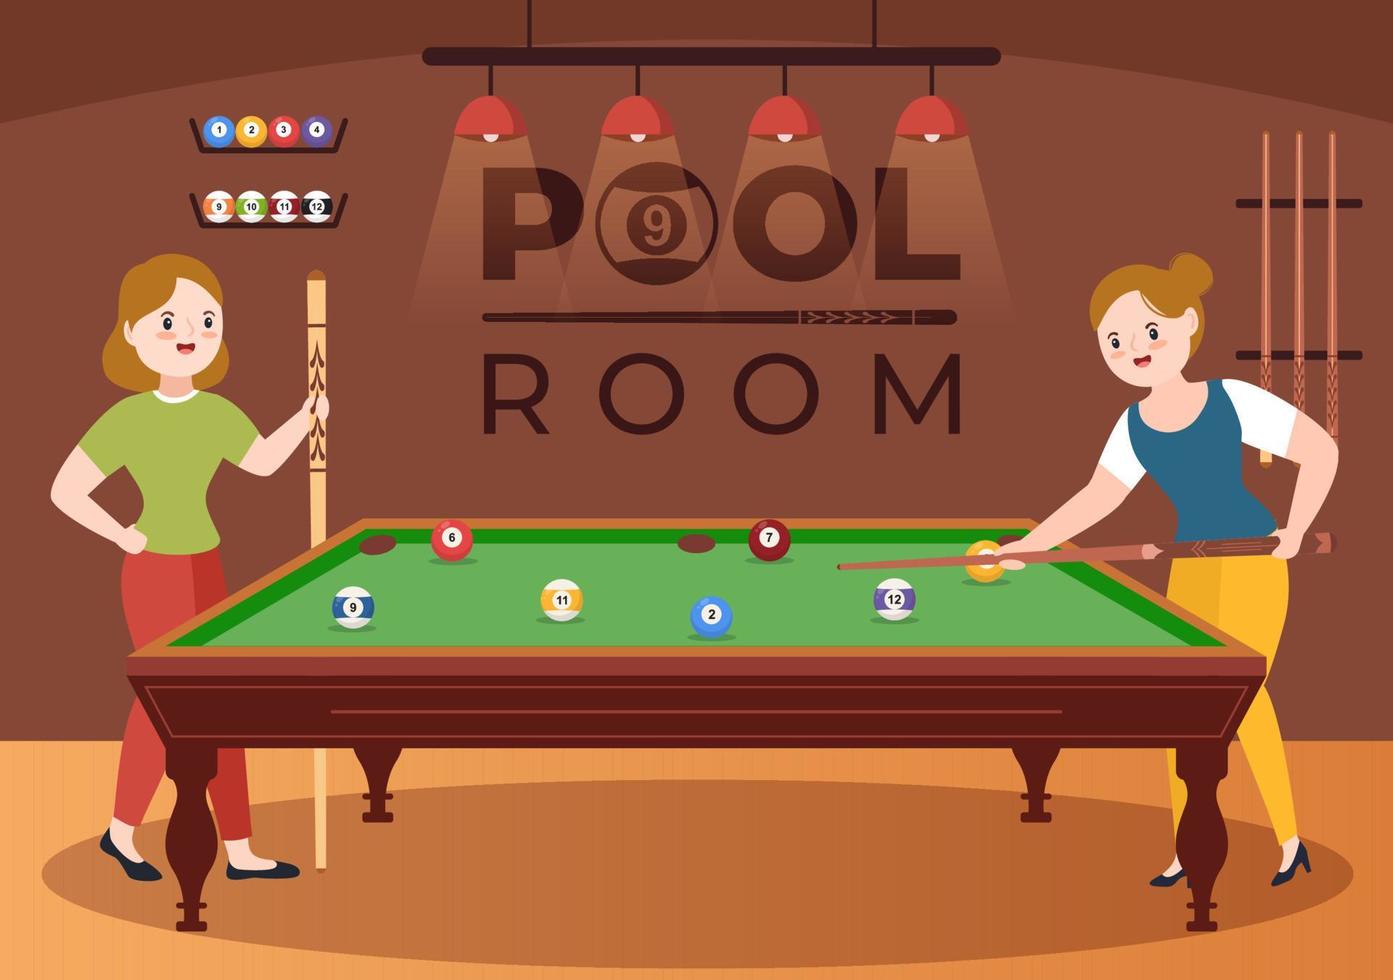 Billiards Game Hand Drawn Cartoon Flat Illustration with Player Pool Room with Stick, Cue Aiming at Billiard Balls in Sports Club vector